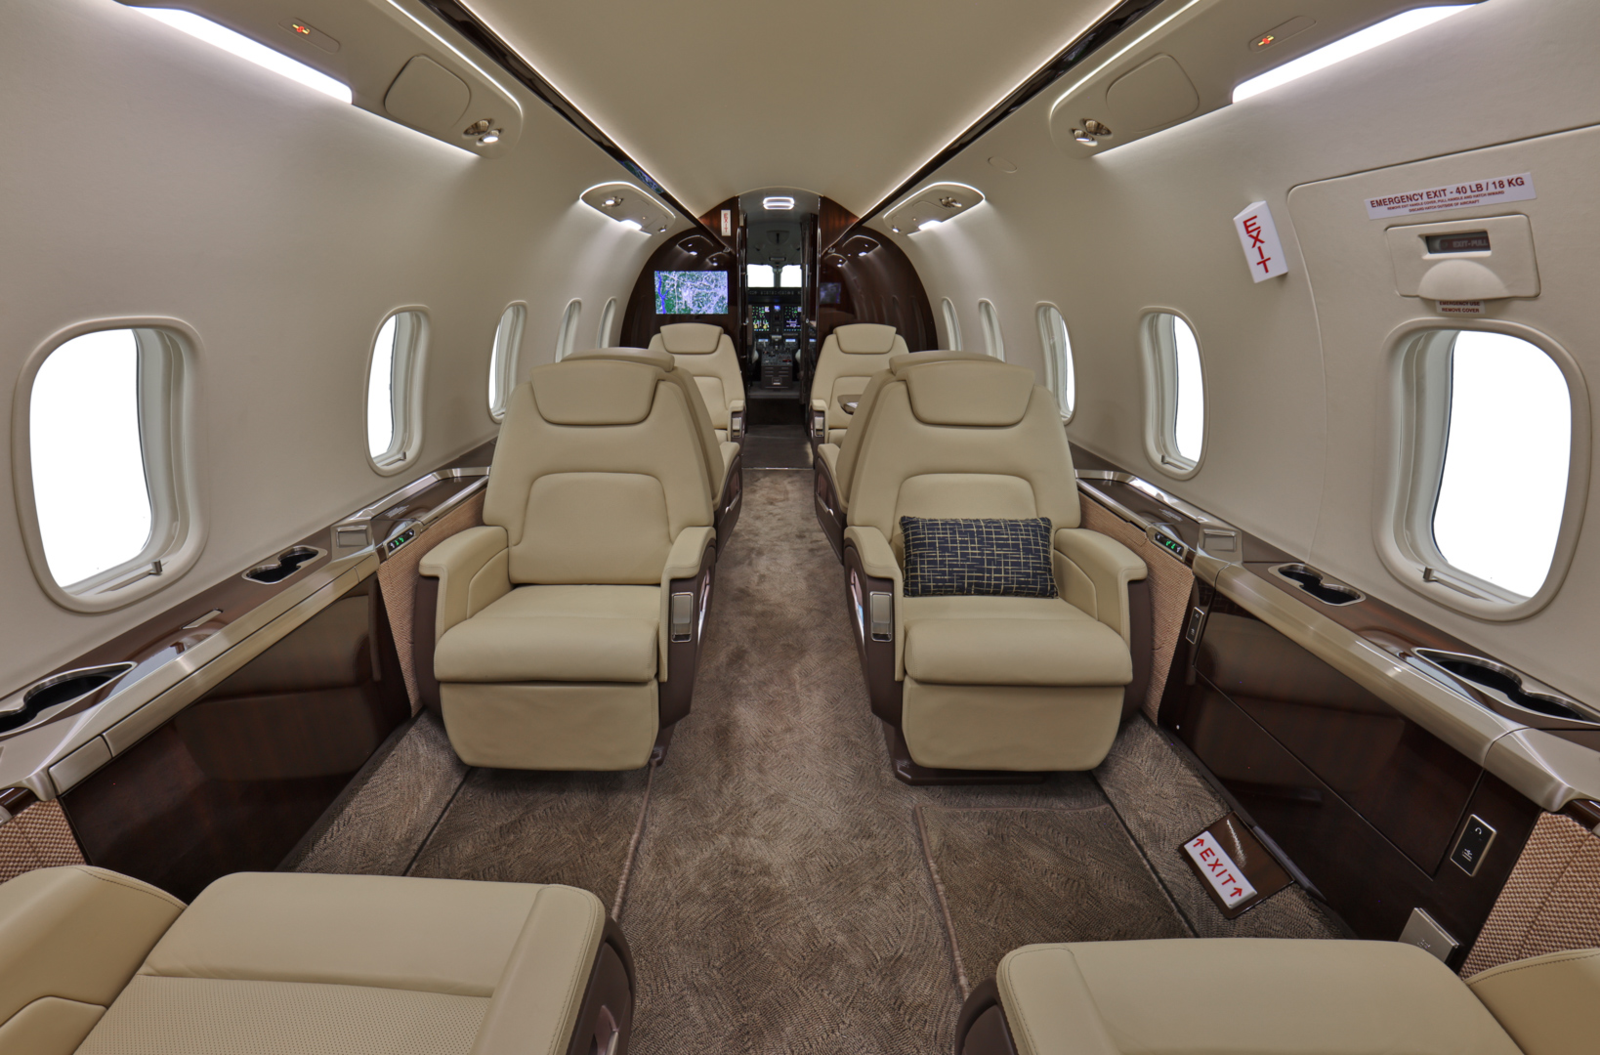 Bombardier CL 350/3500  S/N 20577 for sale | gallery image: /userfiles/files/cl350_sn%2320577__ss_-12.png